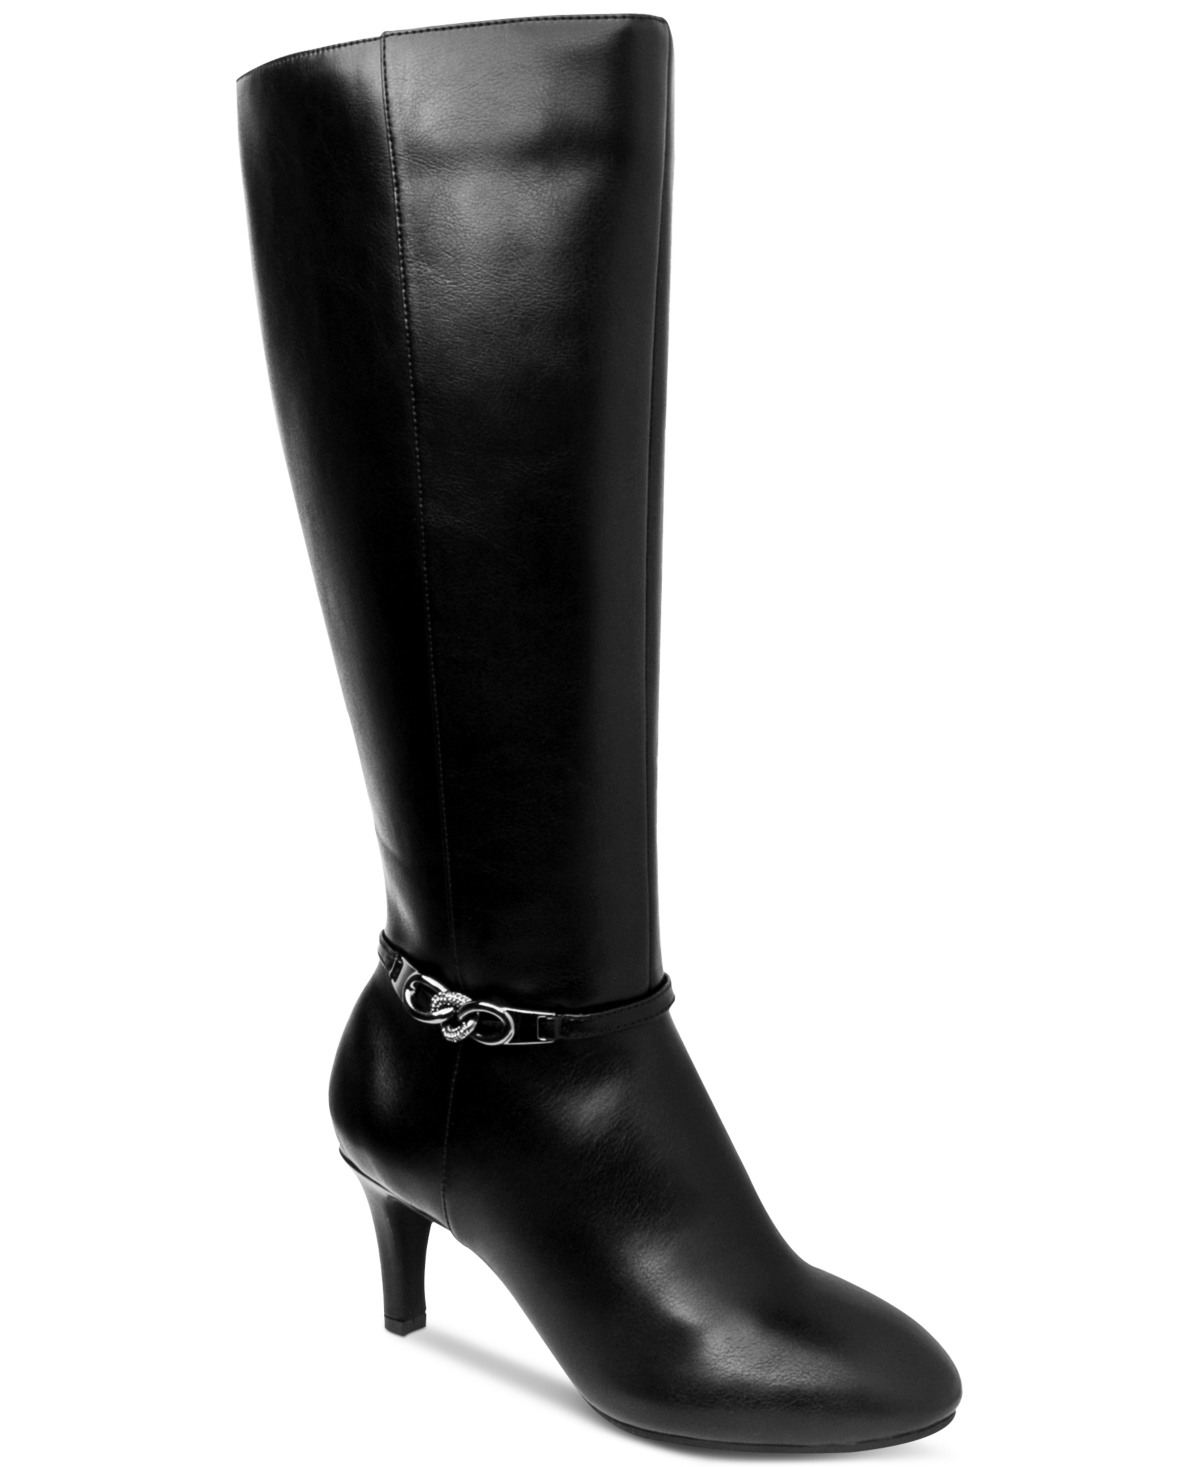 Hanna Wide-Calf Dress Boots, Created for Macy's - Winter White